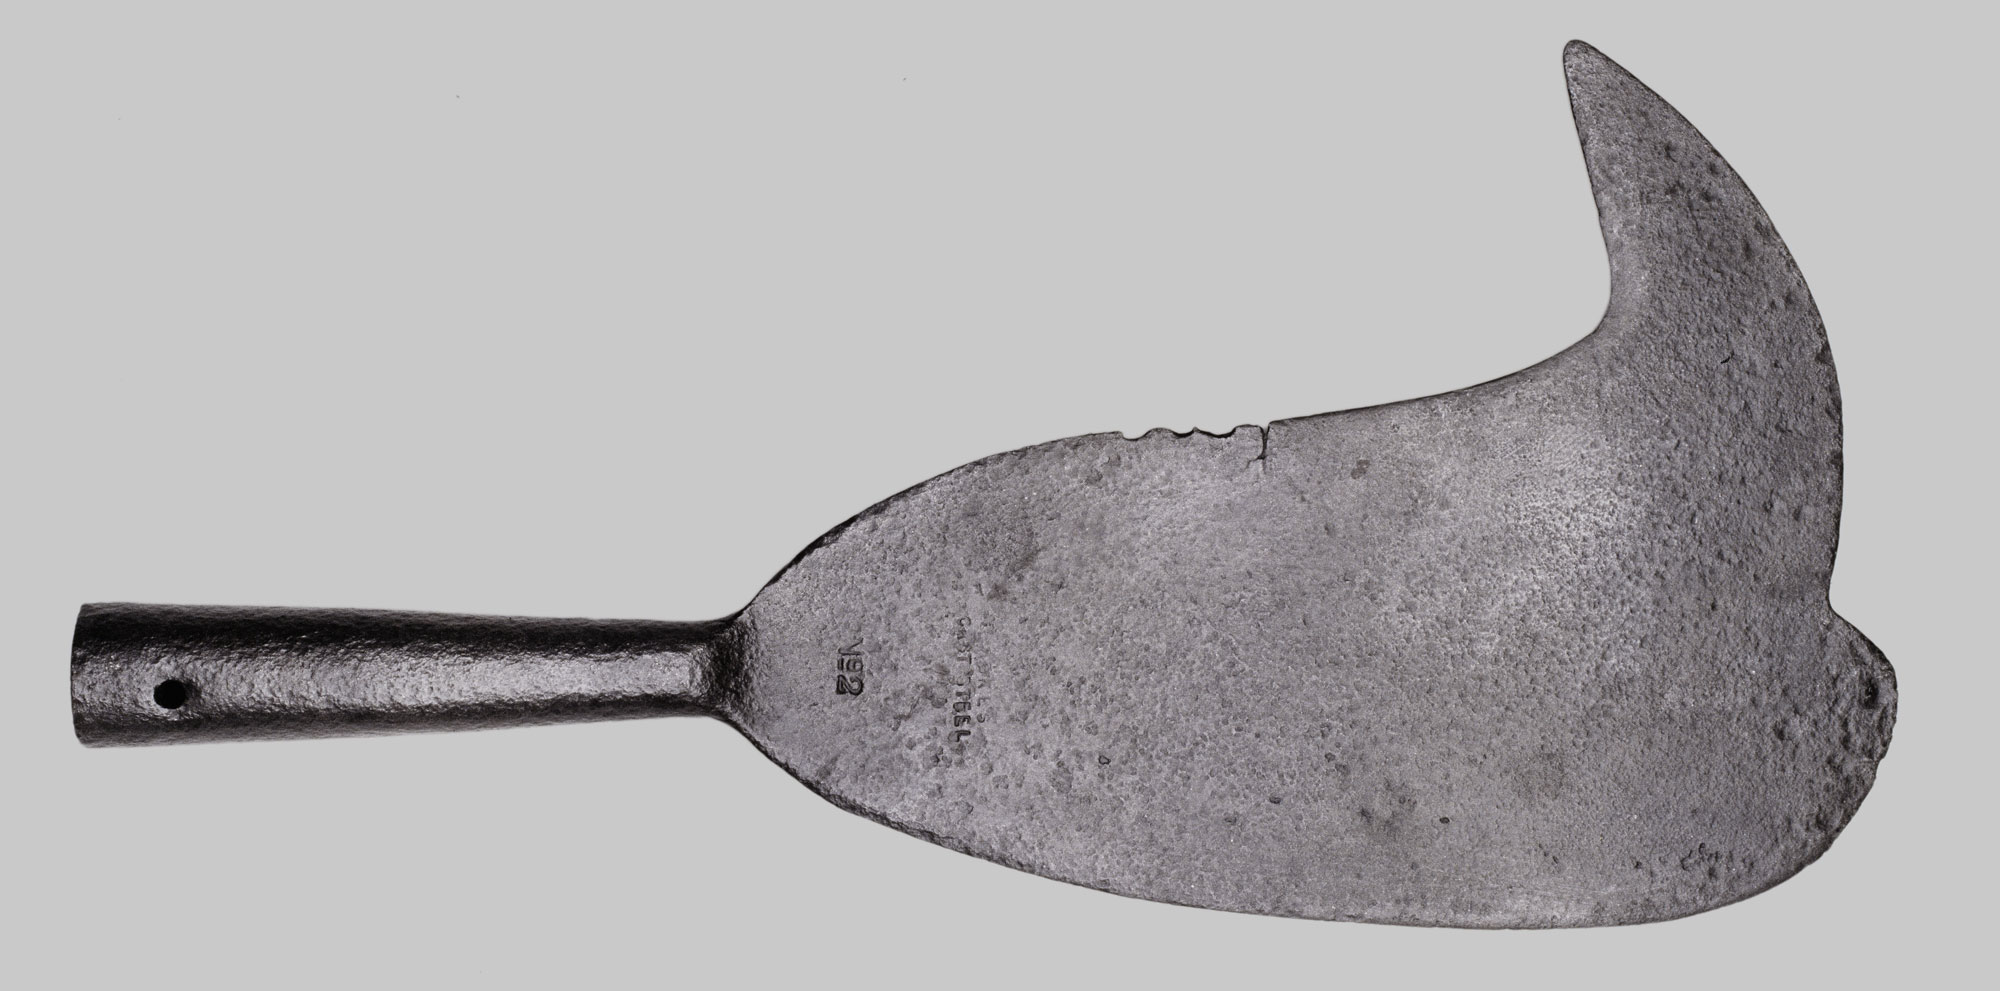 Photograph of a sugarcane knife used by enslaved people to harvest sugarcane in the Danish West Indies in the 1800s. The photo shows a metal knife with a broad, curved blade and a thin metal handle.